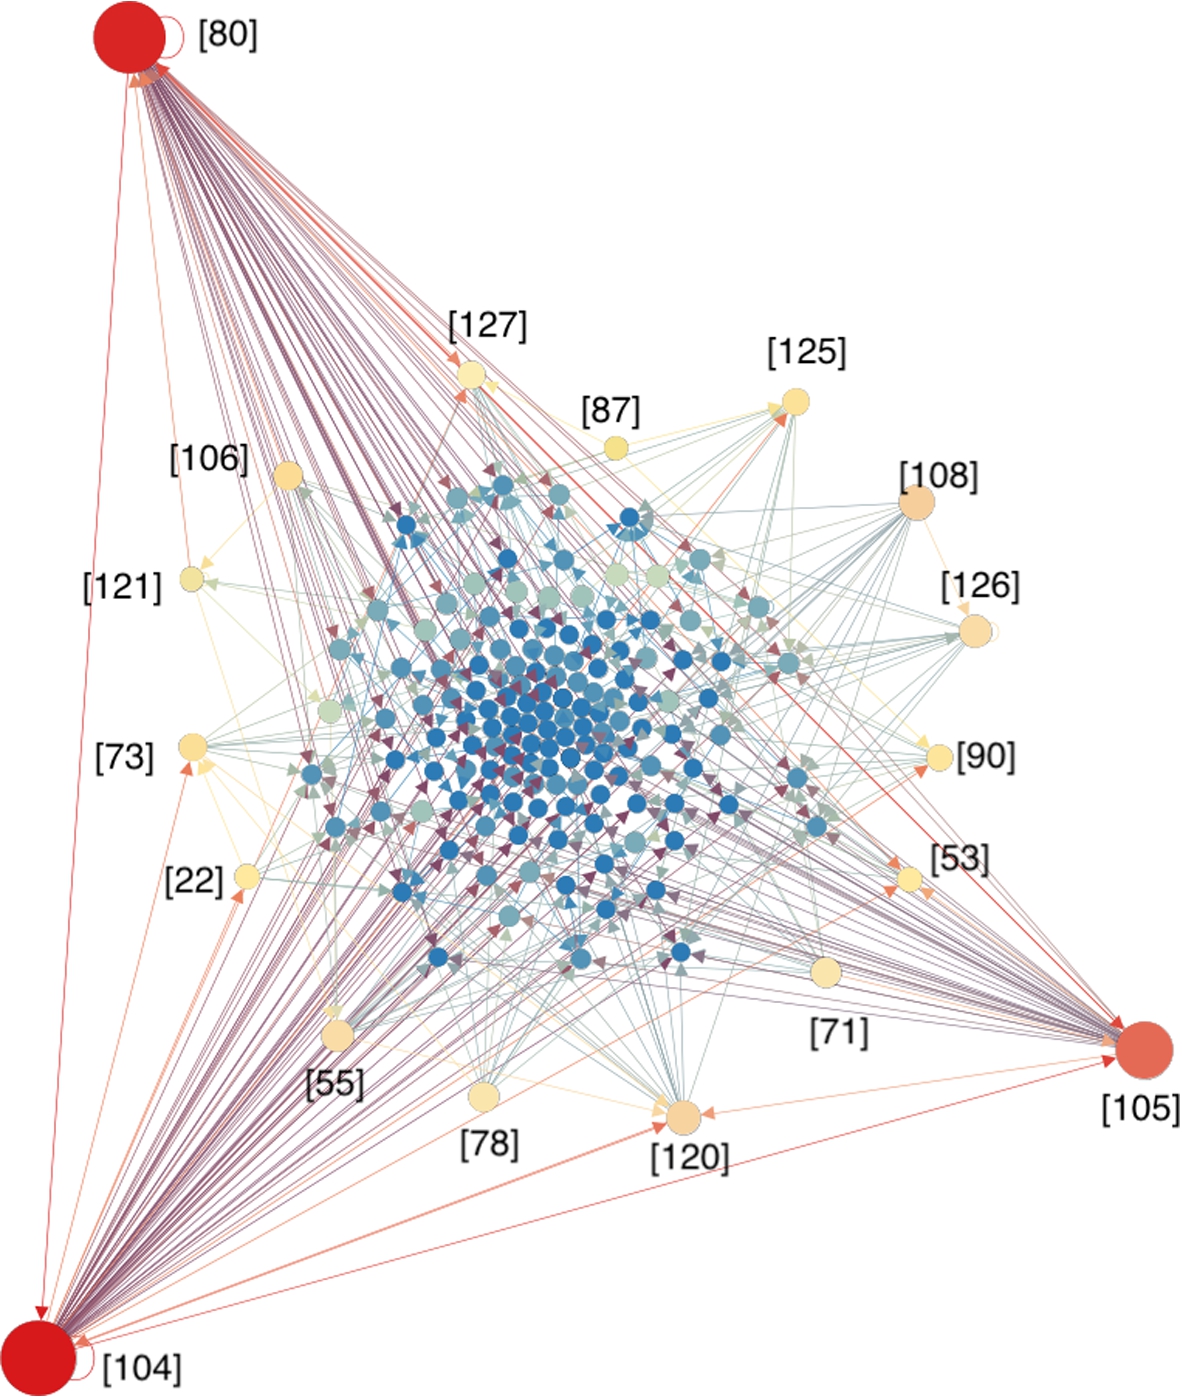 Citation network among the selected papers. Papers are presented as nodes, while the citing relations are presented as edges. The size of nodes are proportional to the number of citations among the 231 papers.